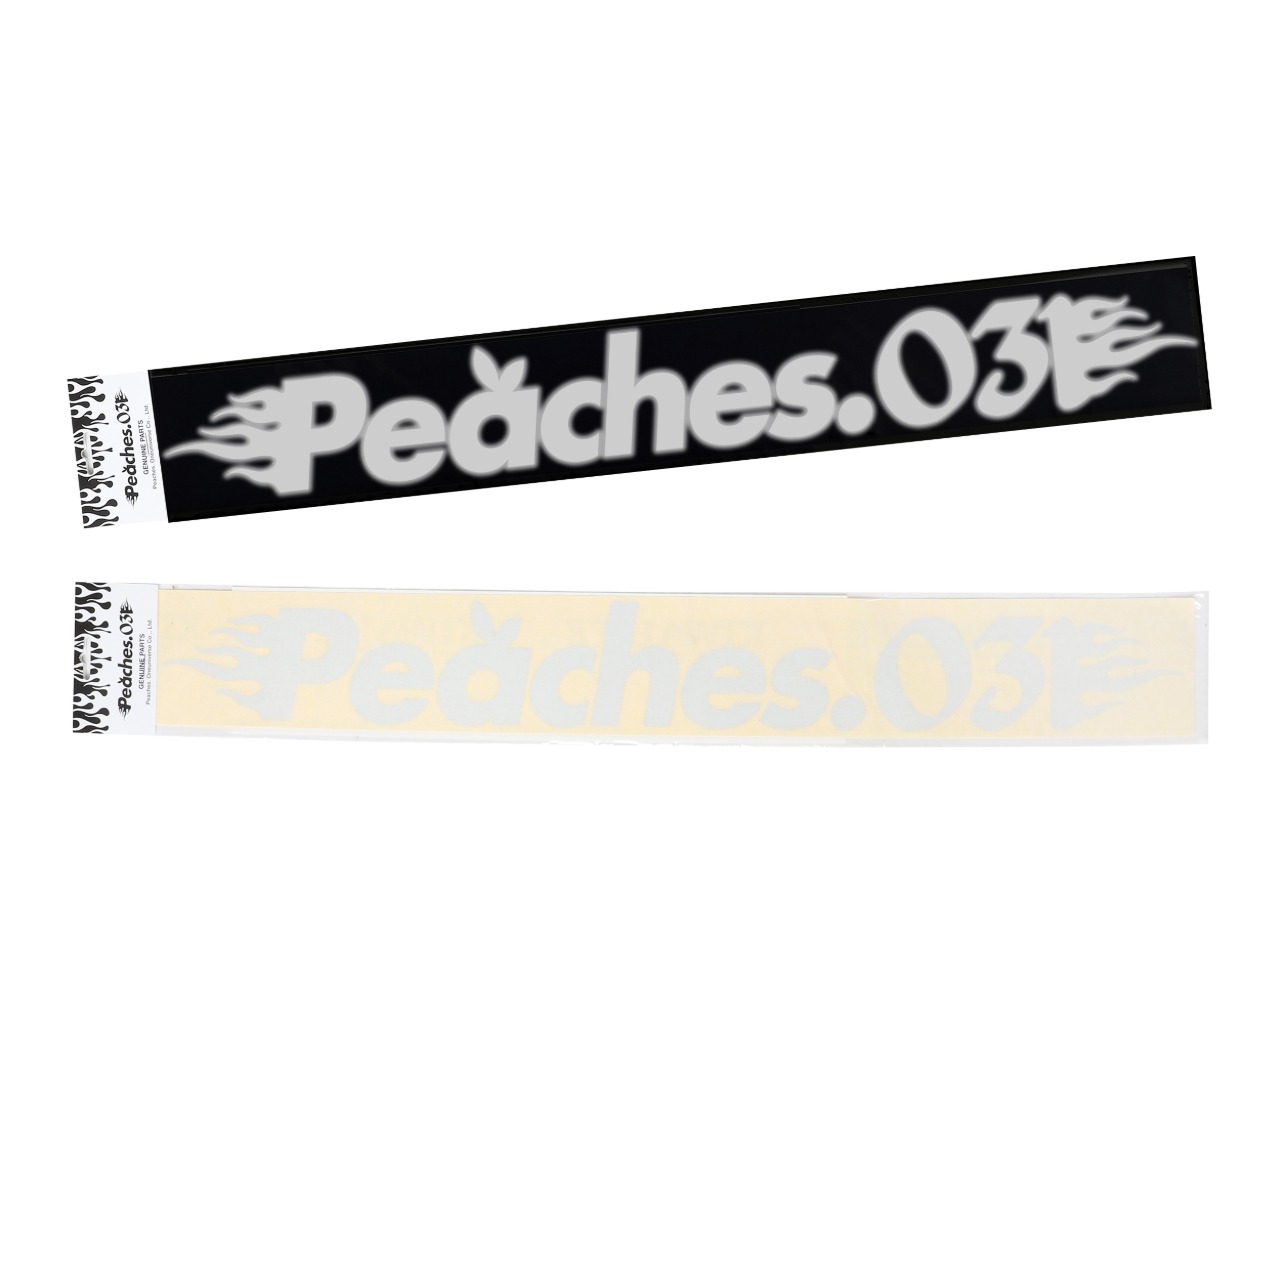 Peaches. LIBILLY Reflective Flame Decal White